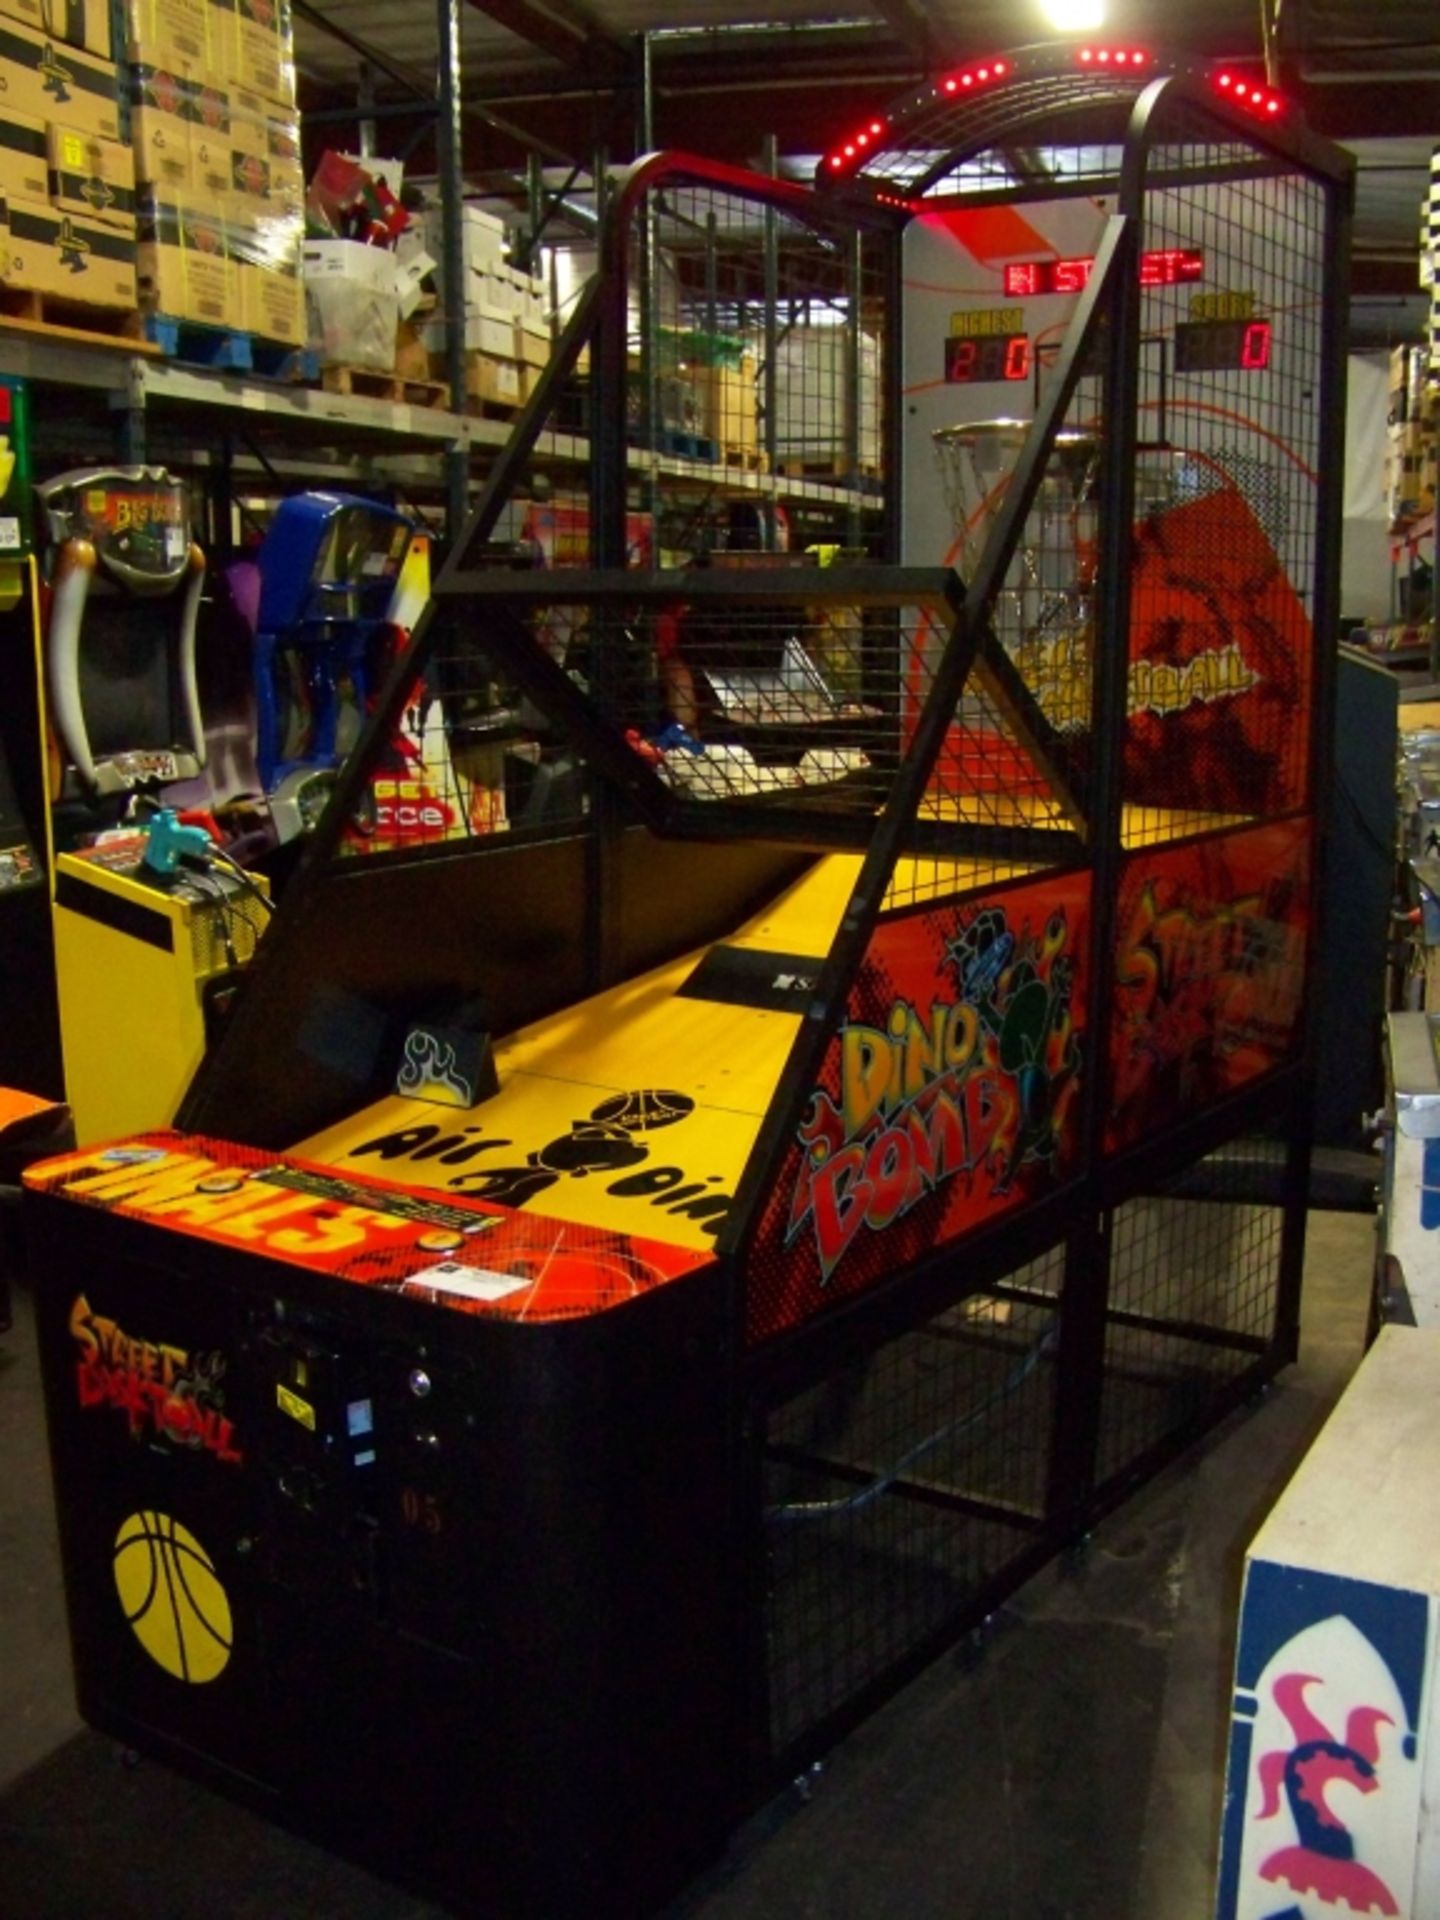 STREET BASKETBALL SPORTS REDEMPTION ARCADE GAME Item is in used condition. Evidence of wear and